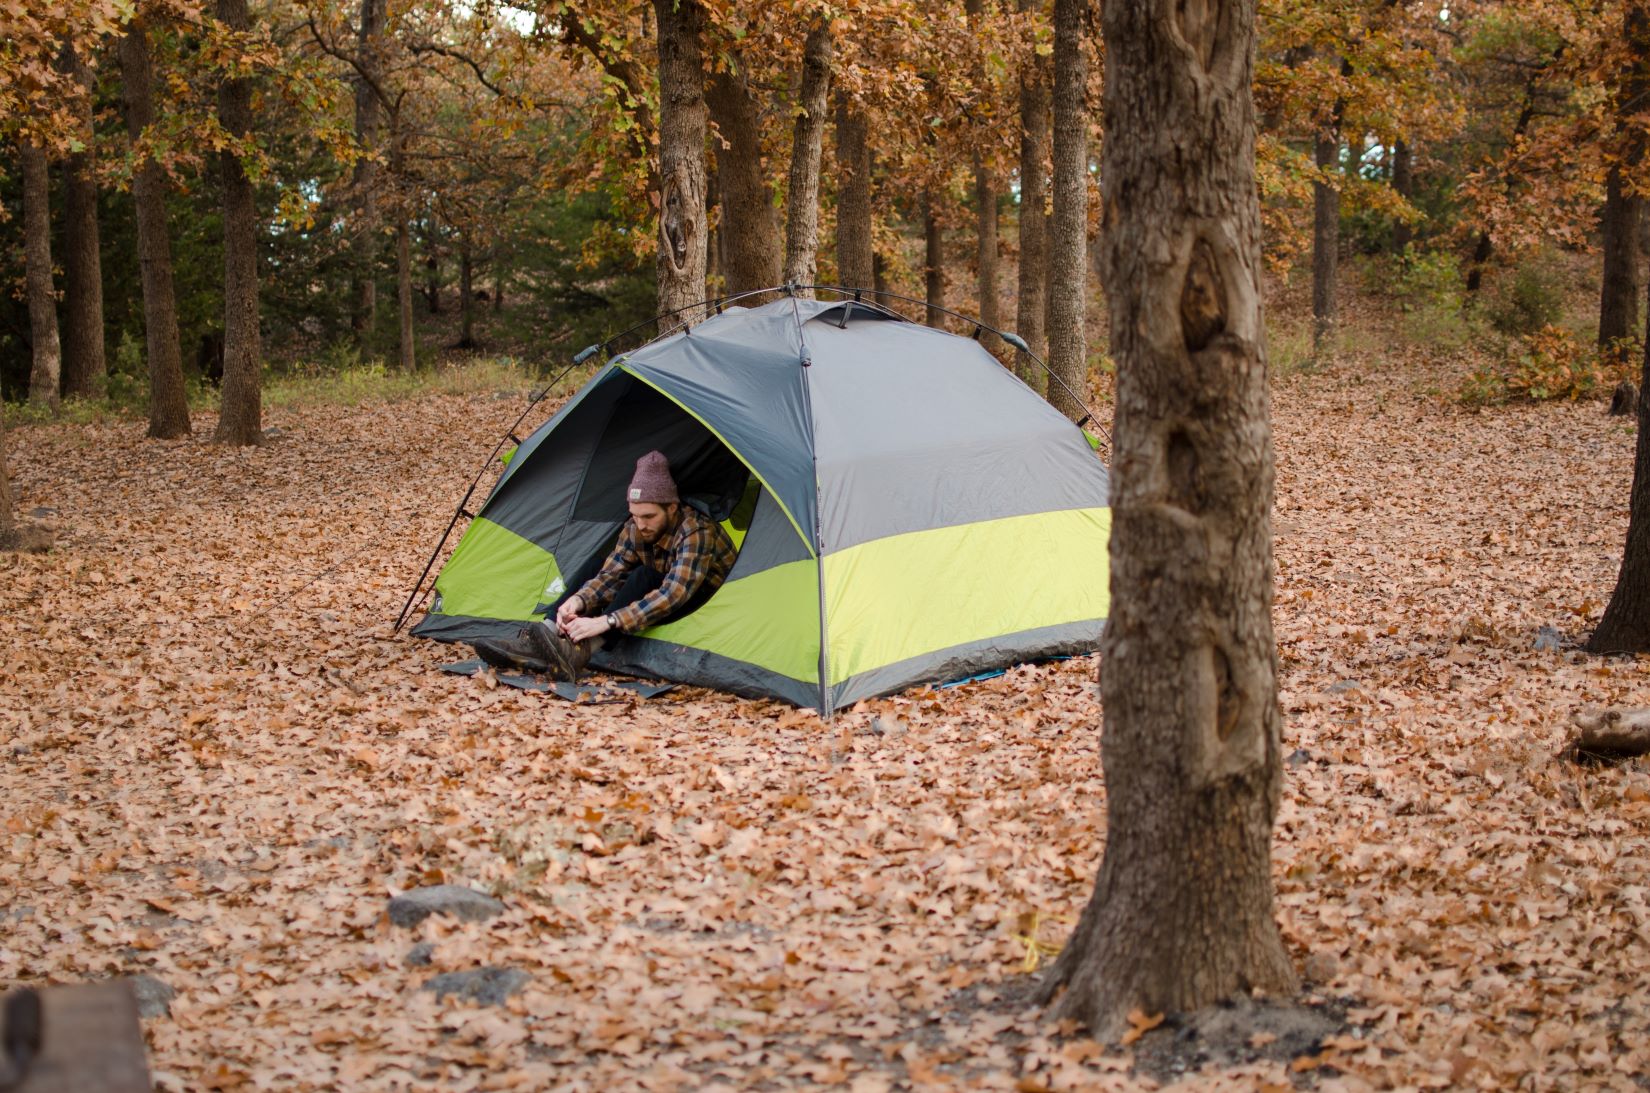 An image of a person in a tent in the woods.